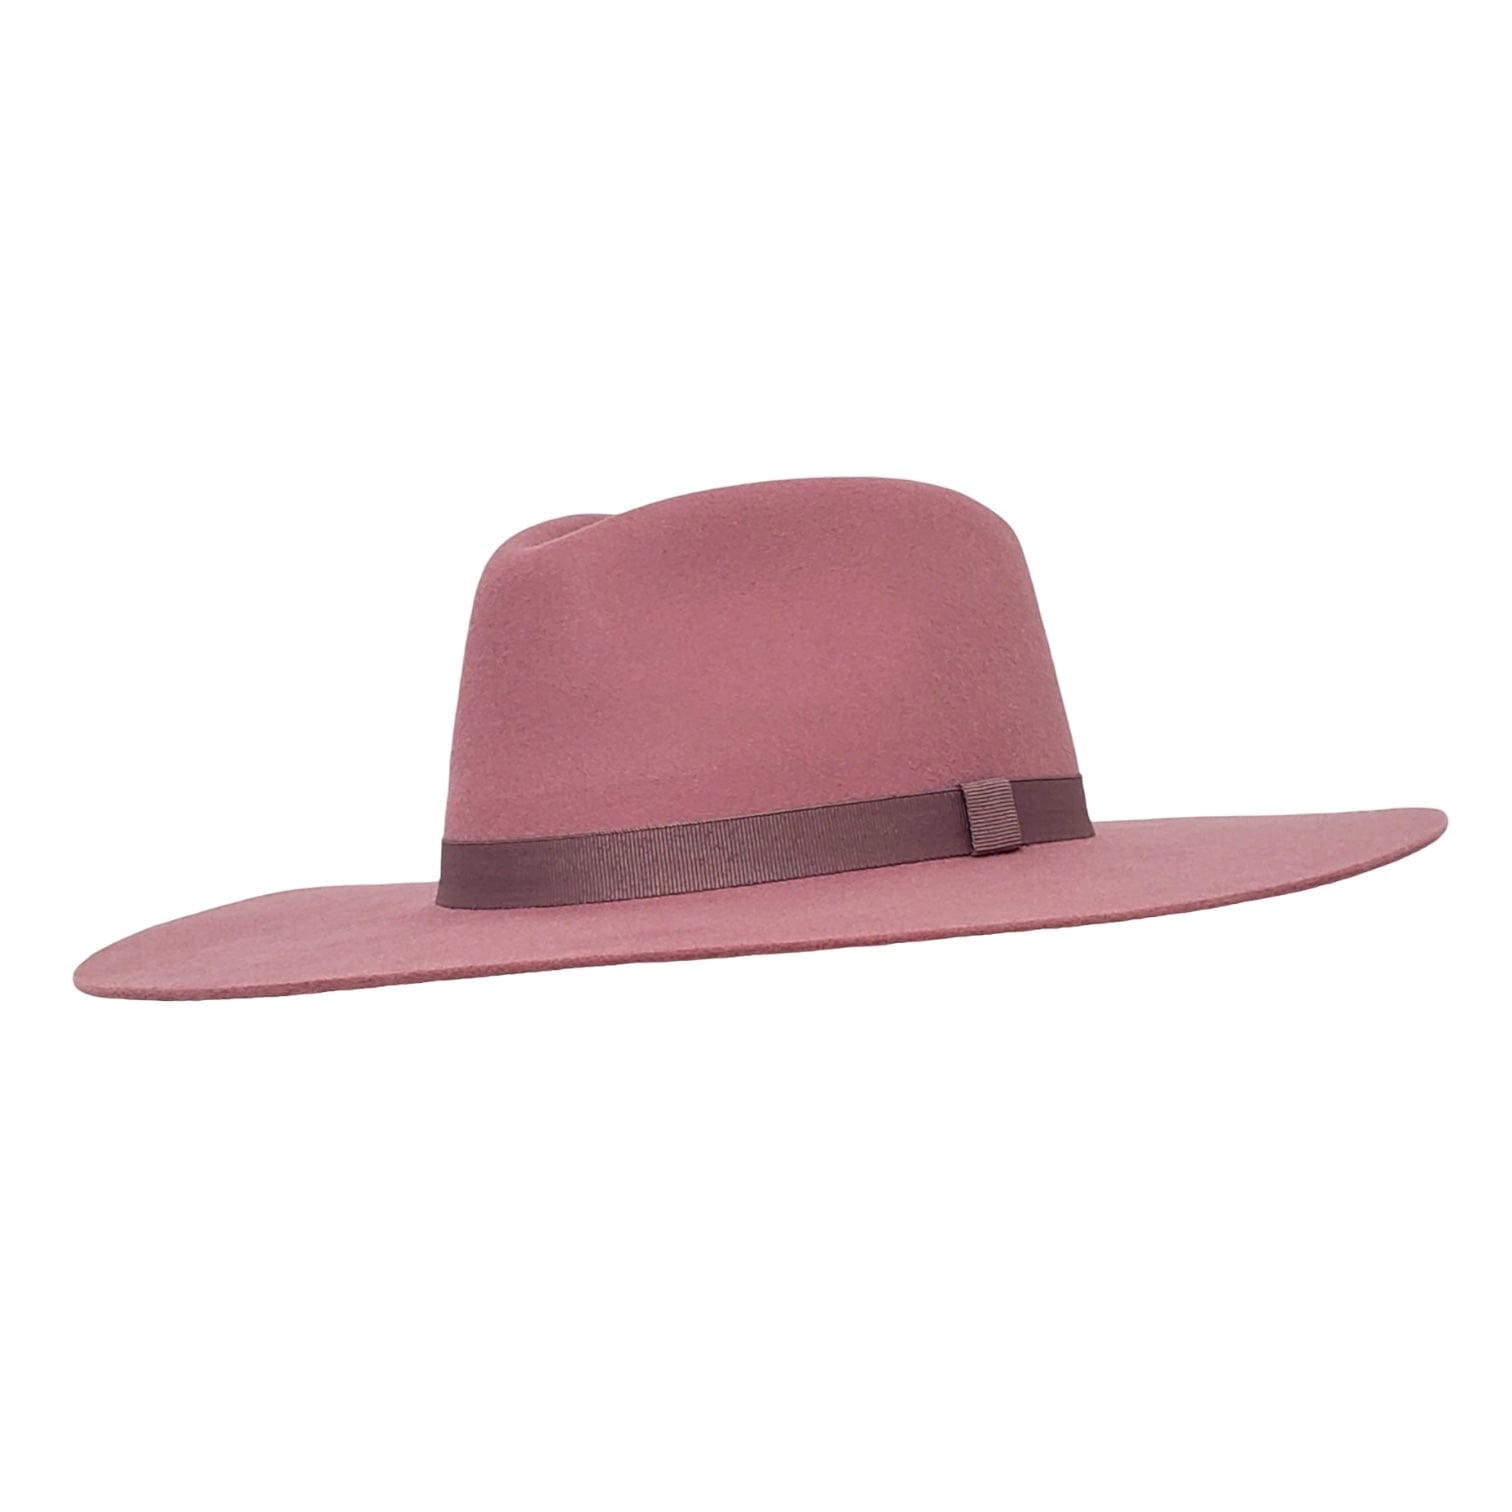 Gone Country Hats Men & Women's Hats Small Fits 6-7/8 to 7 Drifter Mauve - Wool Cashmere